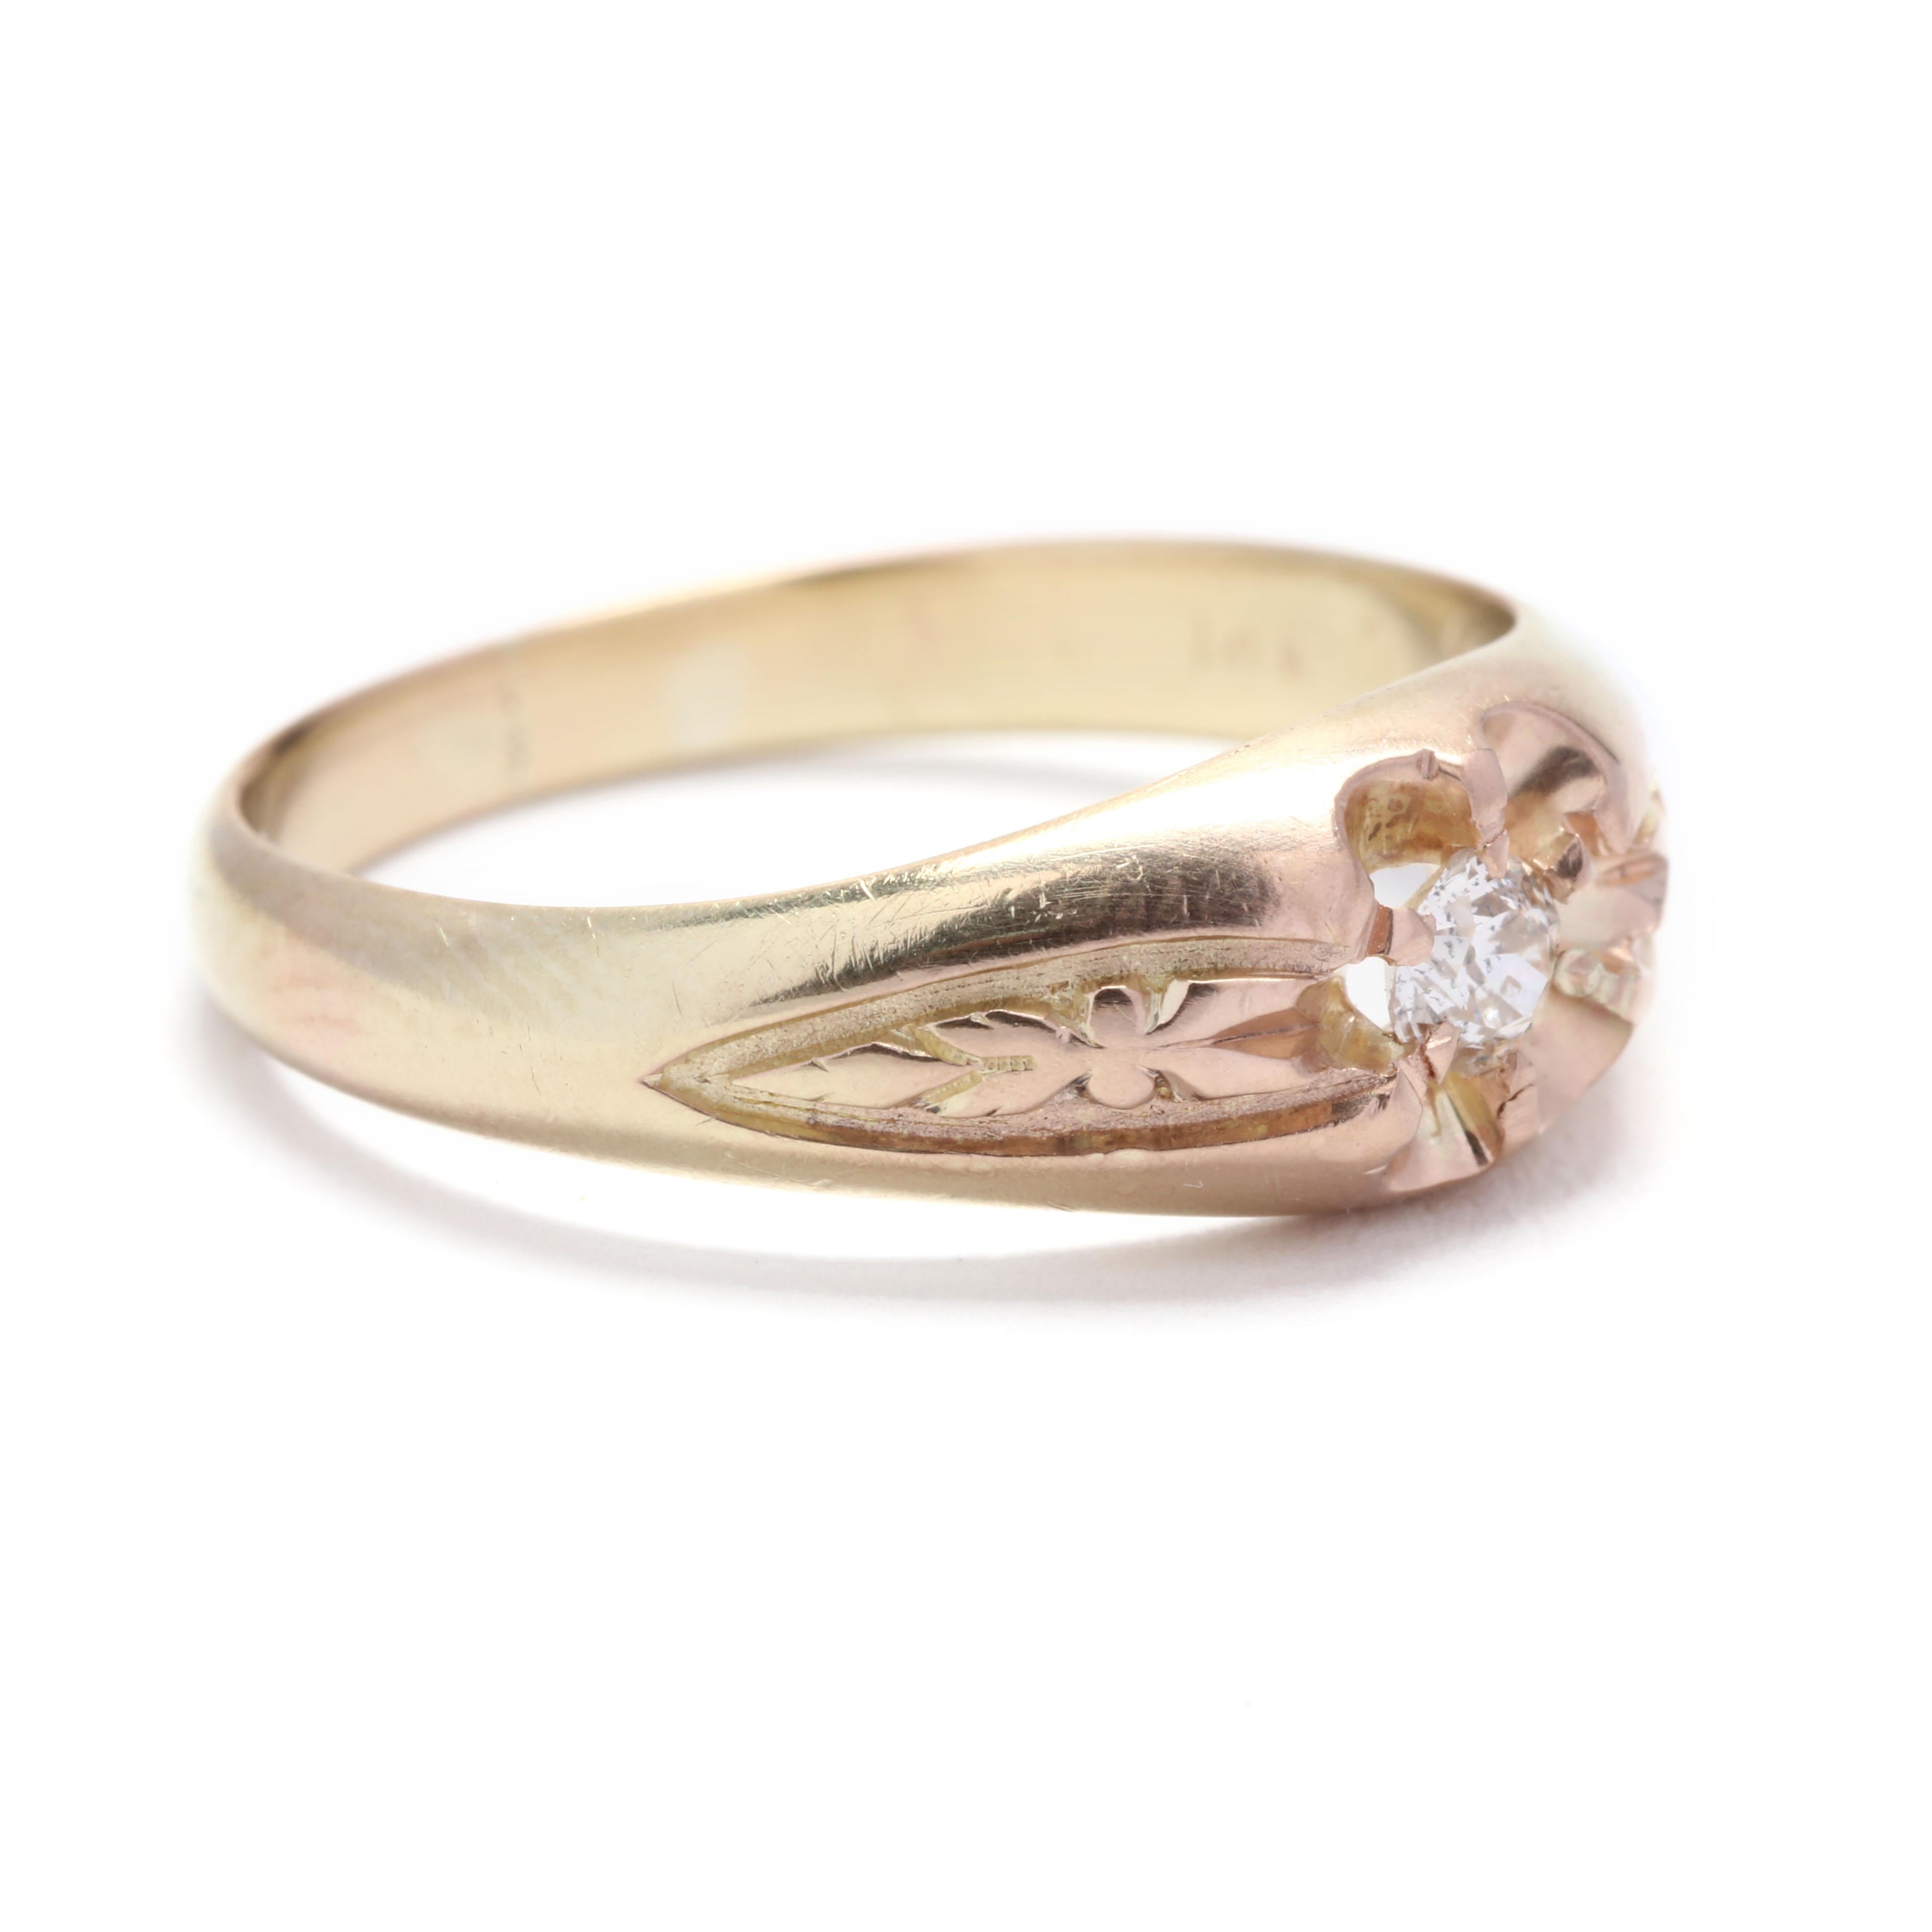 An antique 14 karat yellow gold diamond belcher ring. This ring features a tapered designer with a six prong set old European cut diamond weighing approximately .11 carat with floral detailing on the shoulders and engraved on the inside Edgar